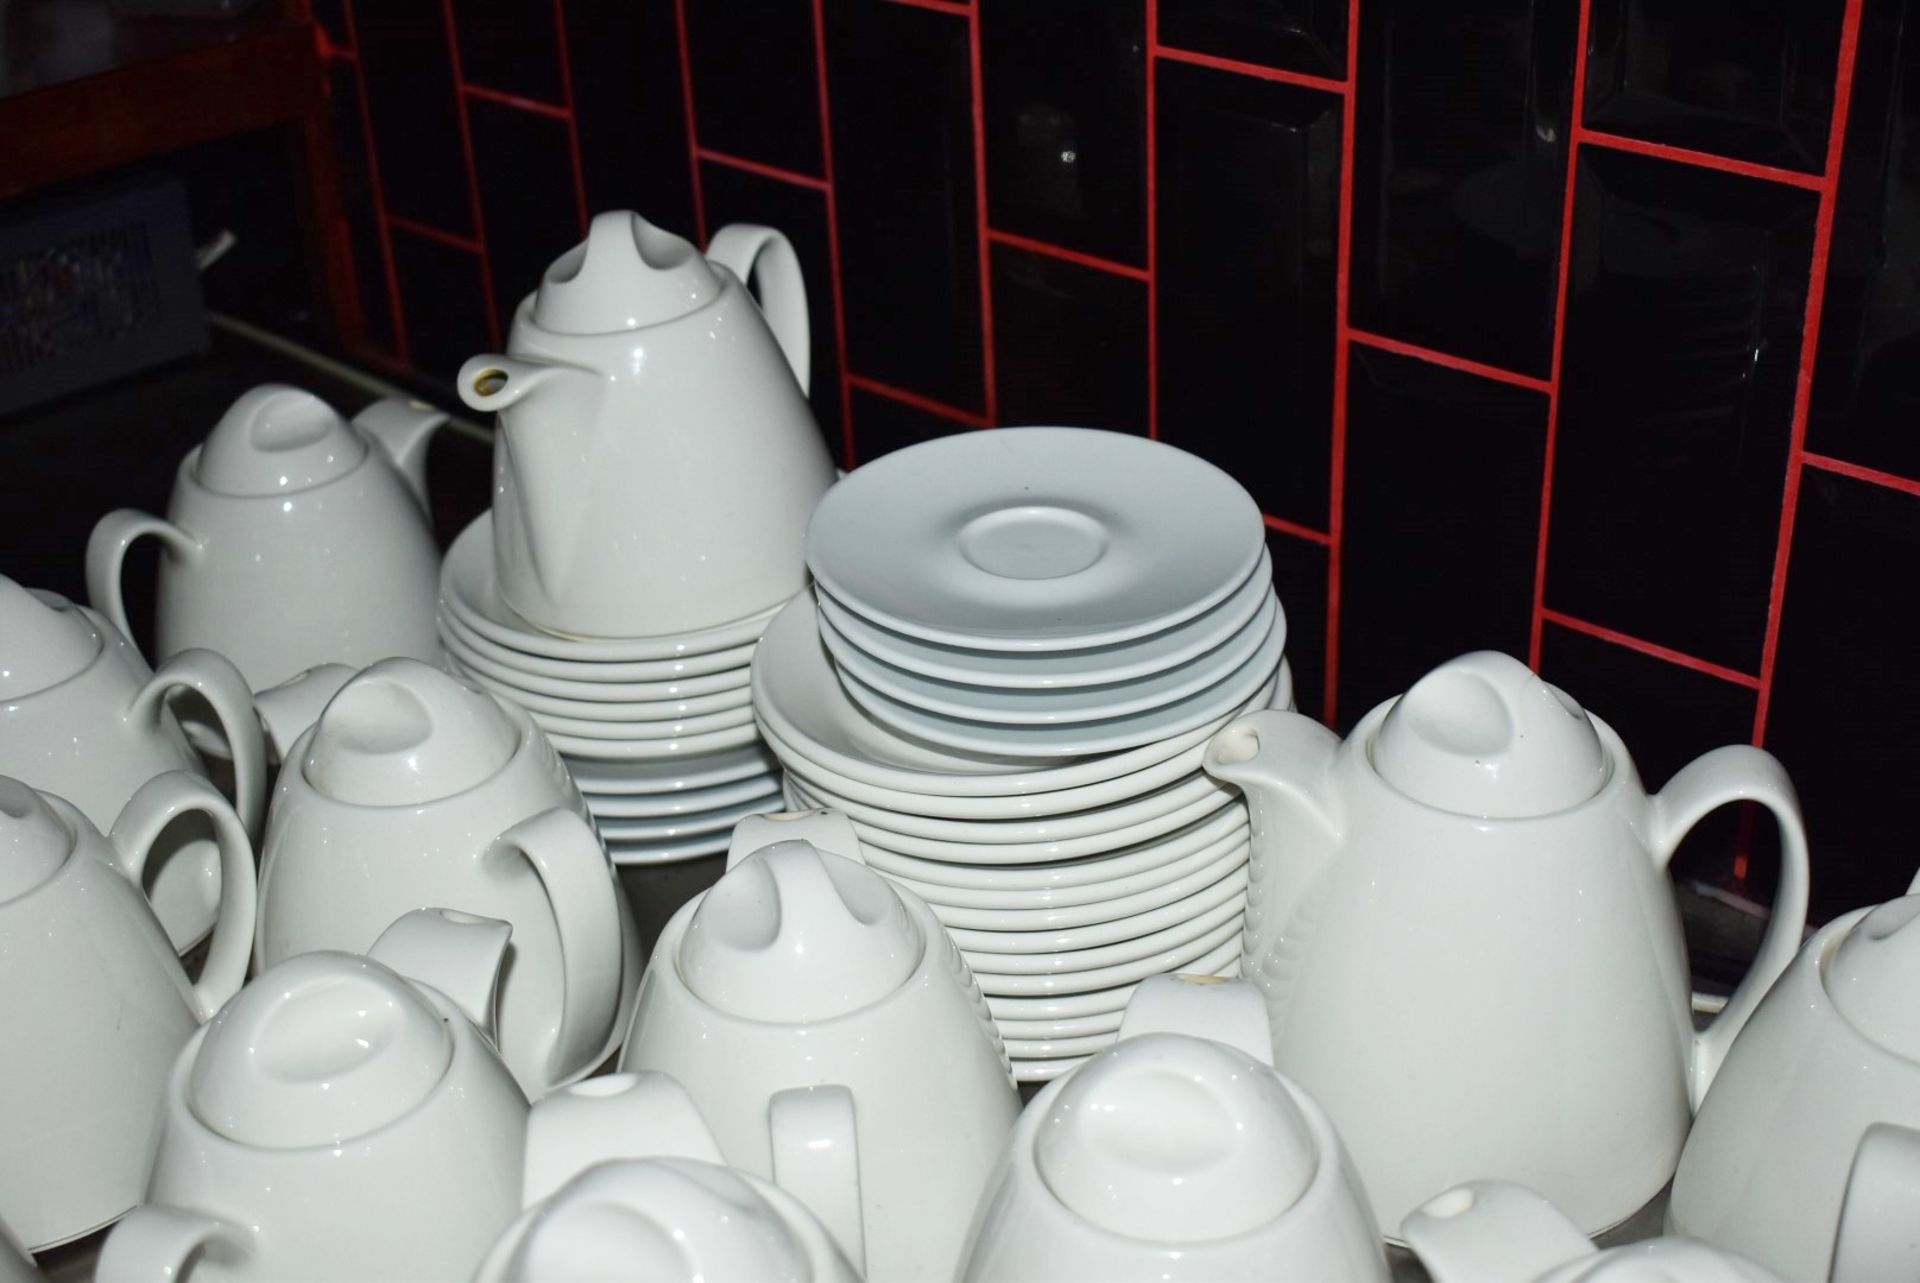 Assorted Collection Ceramic Coffee/Teaware to Include 80 Items - Teapots, Milk Jugs, Saucers & More - Image 6 of 10